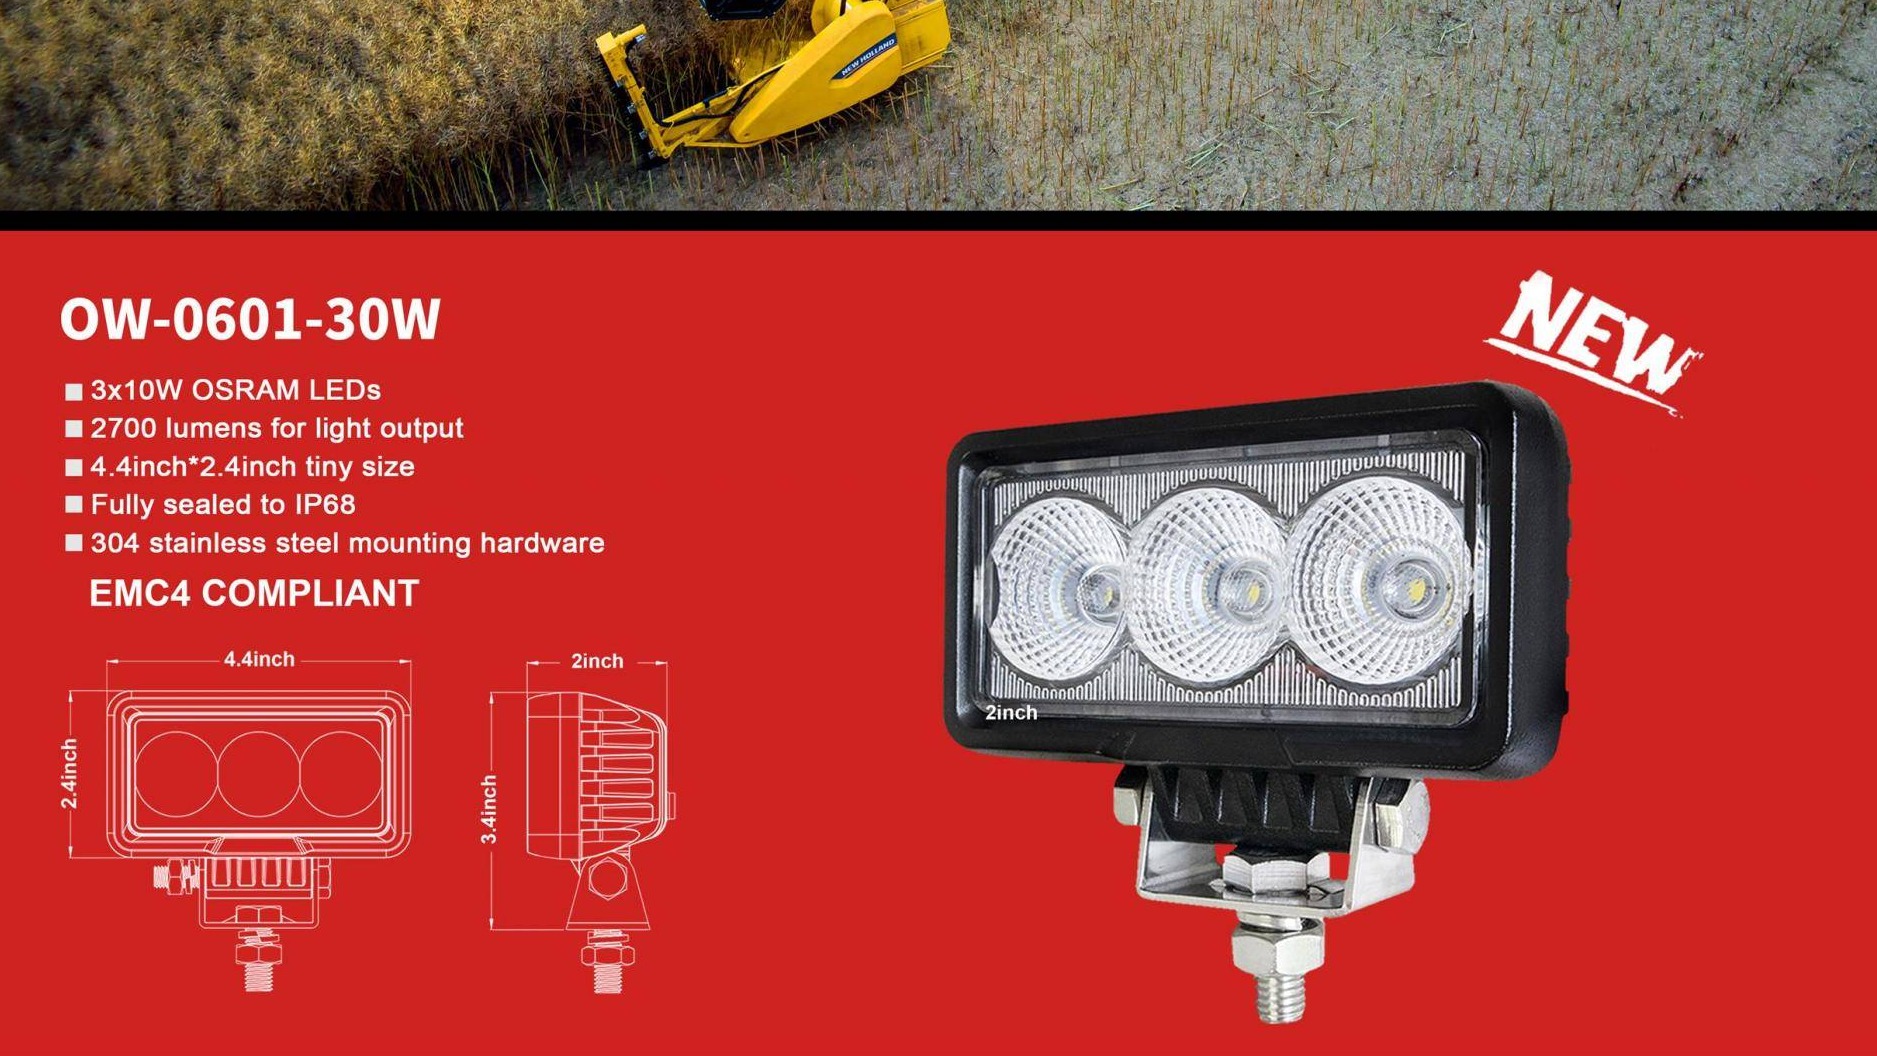 NEW ARRIVAL TINY SIZE 4.4’’ RUGGED LED WORK LAMP 30W